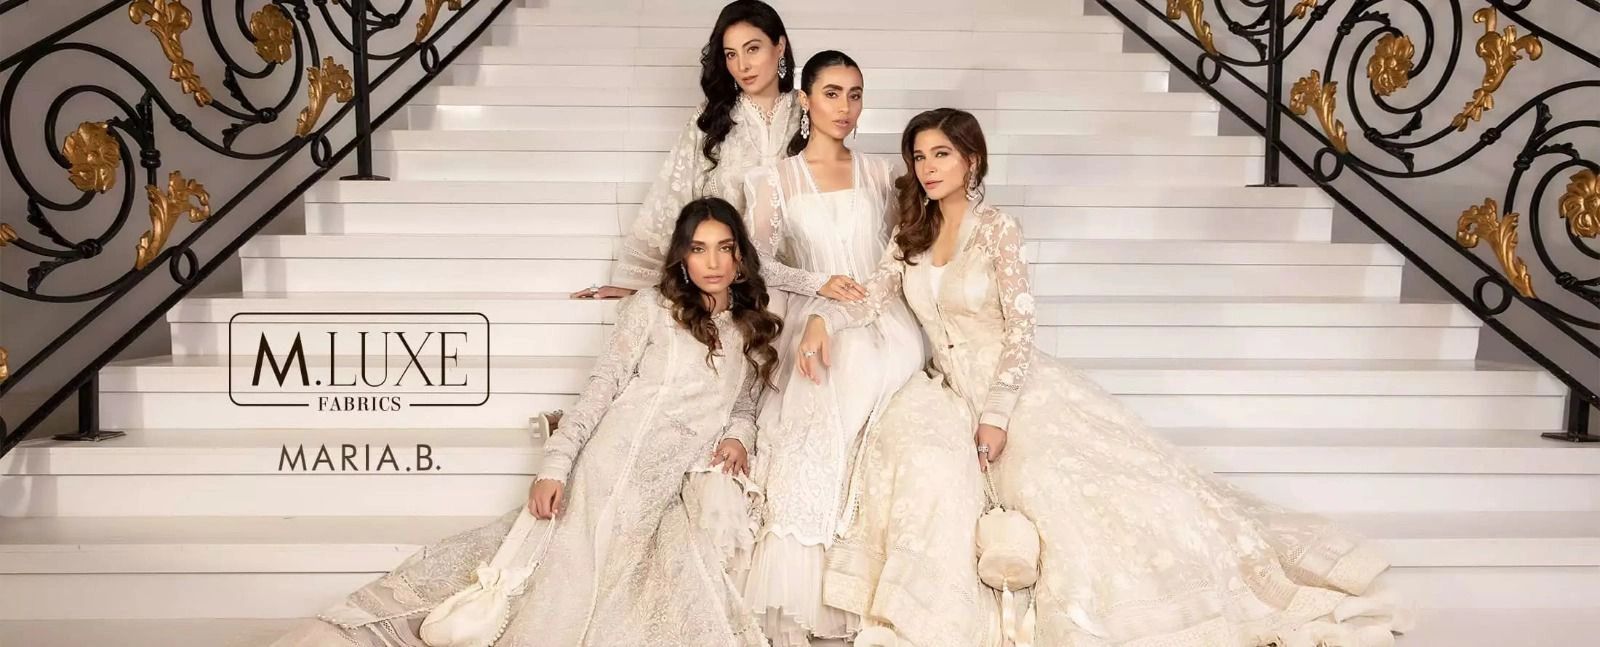 Rameen Fashion - Pakistani Designers Suits - Indian Dresses for Wedding,  Pakistani Designers Suits - Indian Dresses for Wedding, Low Price Good  Quality, Asian Clothes & Jewellery